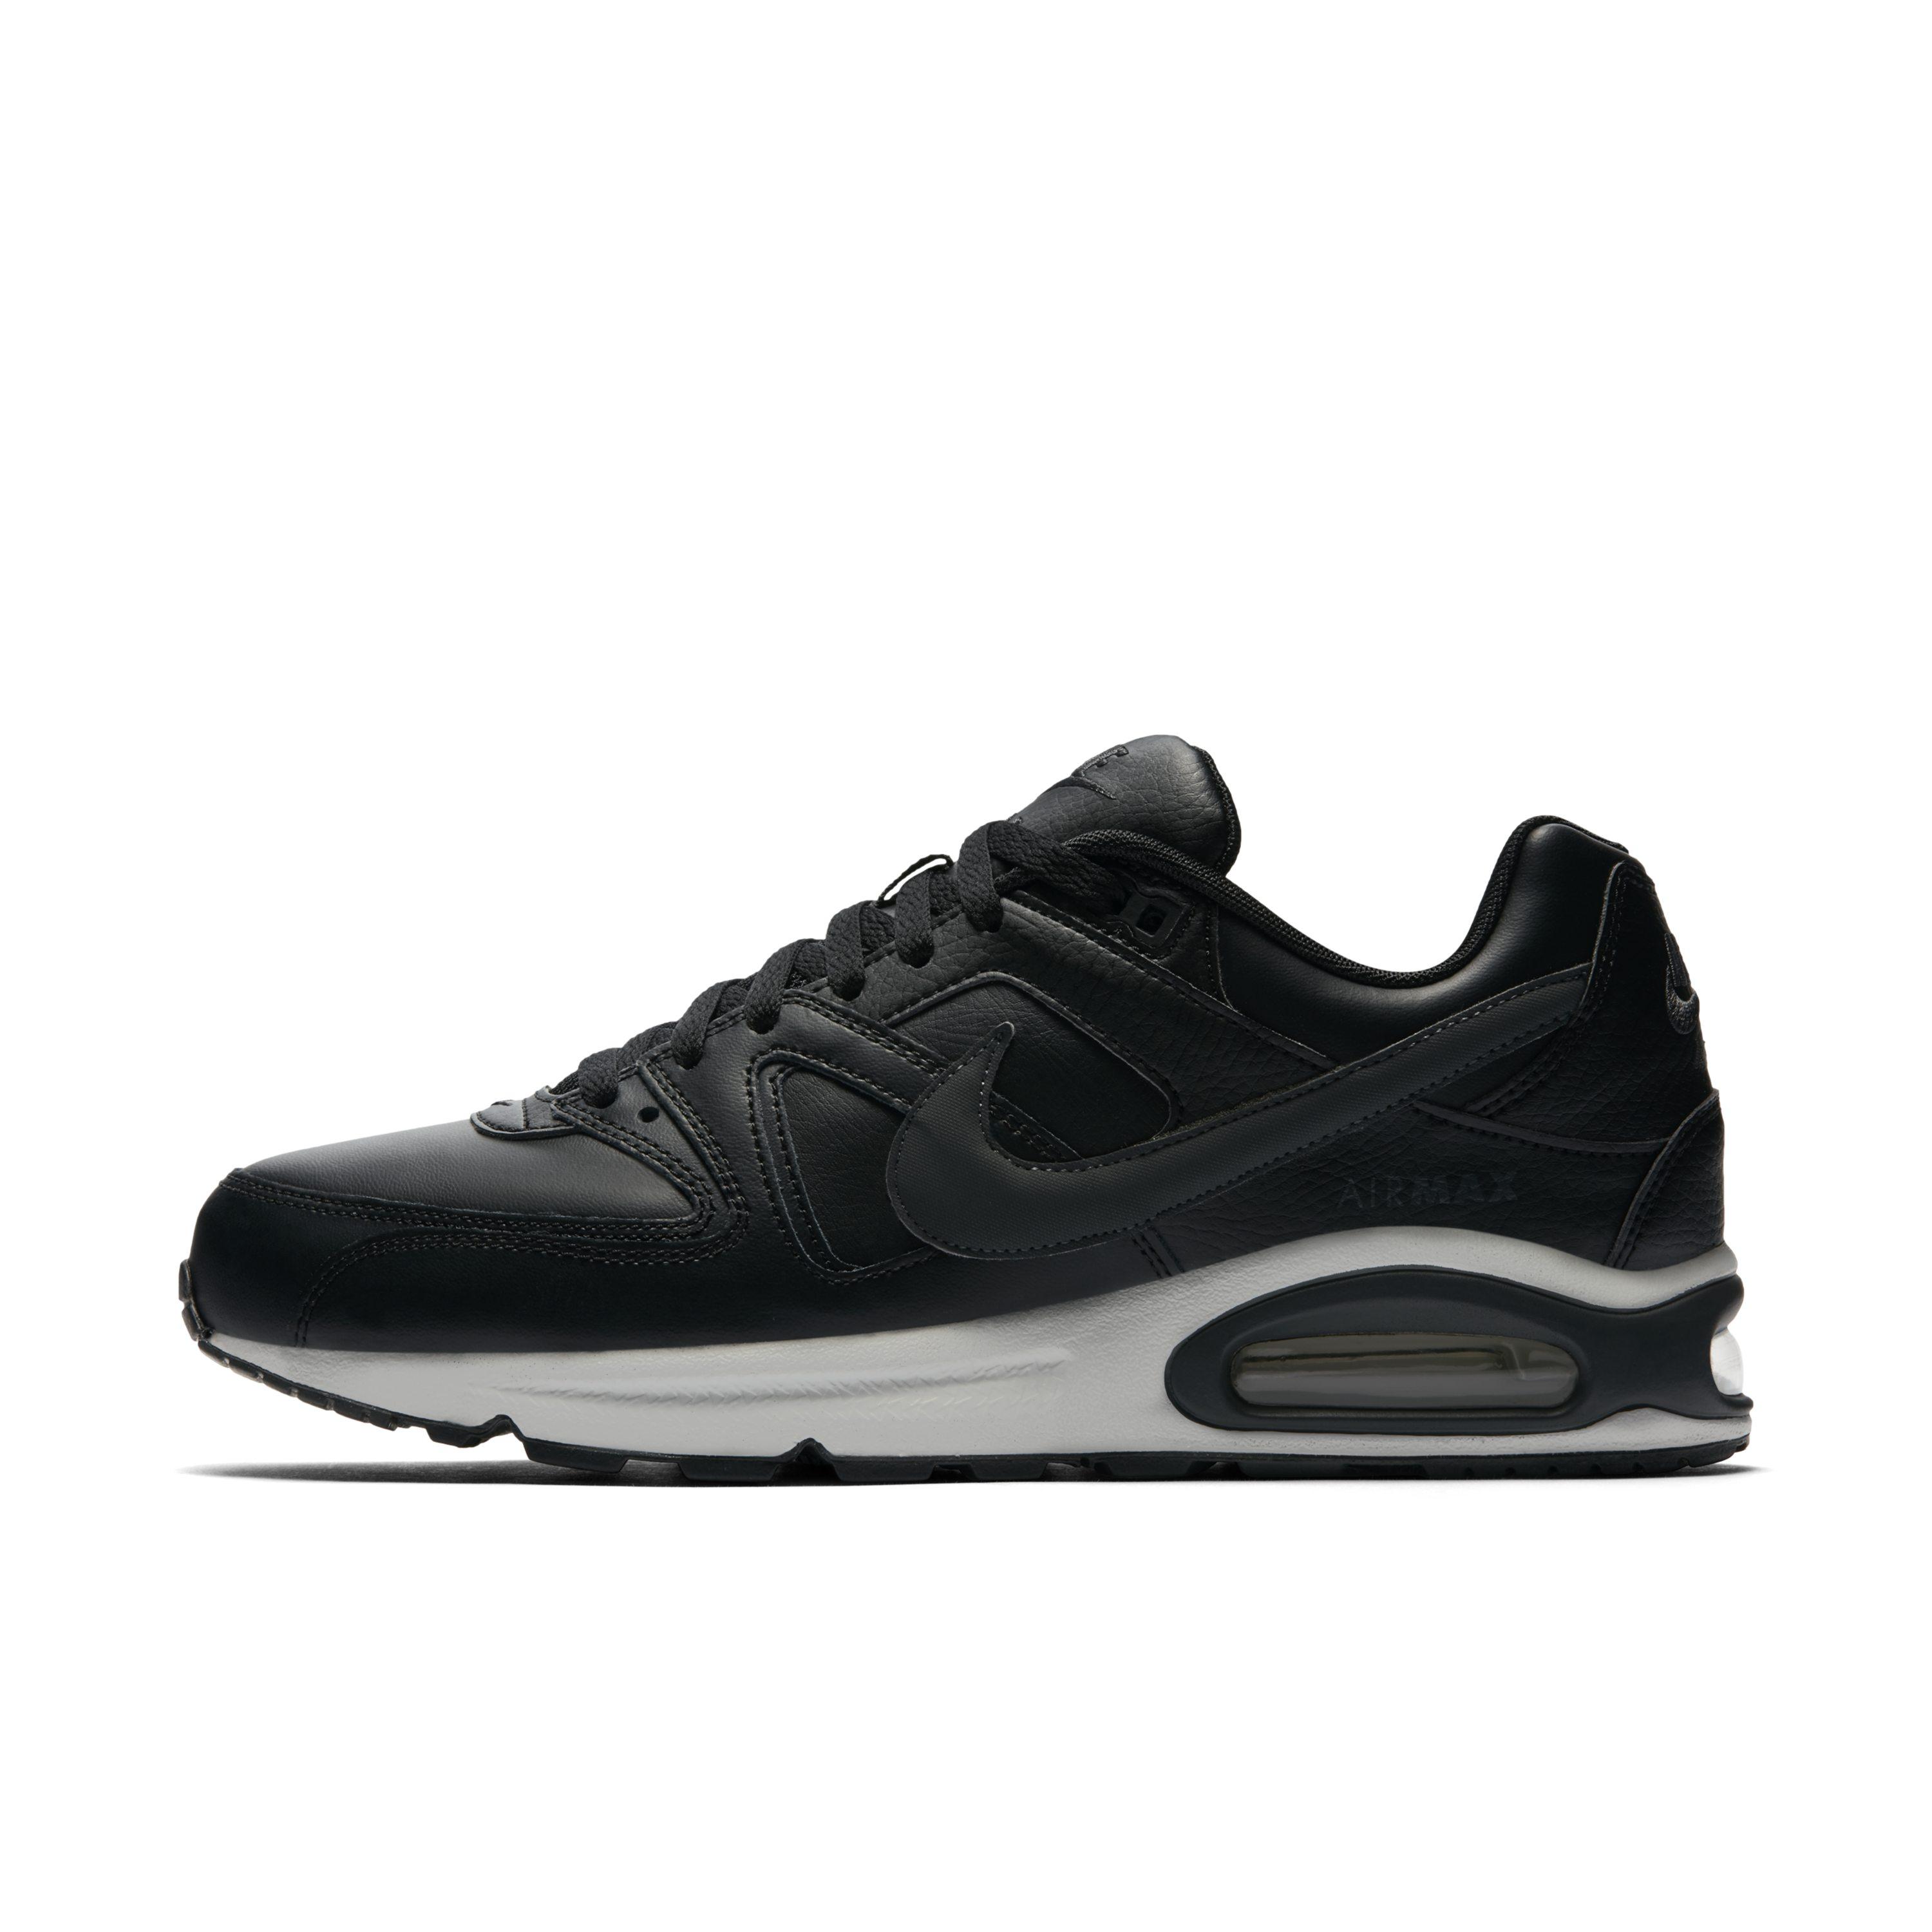 Nike Air Max Command Shoe in Black for Men - Lyst